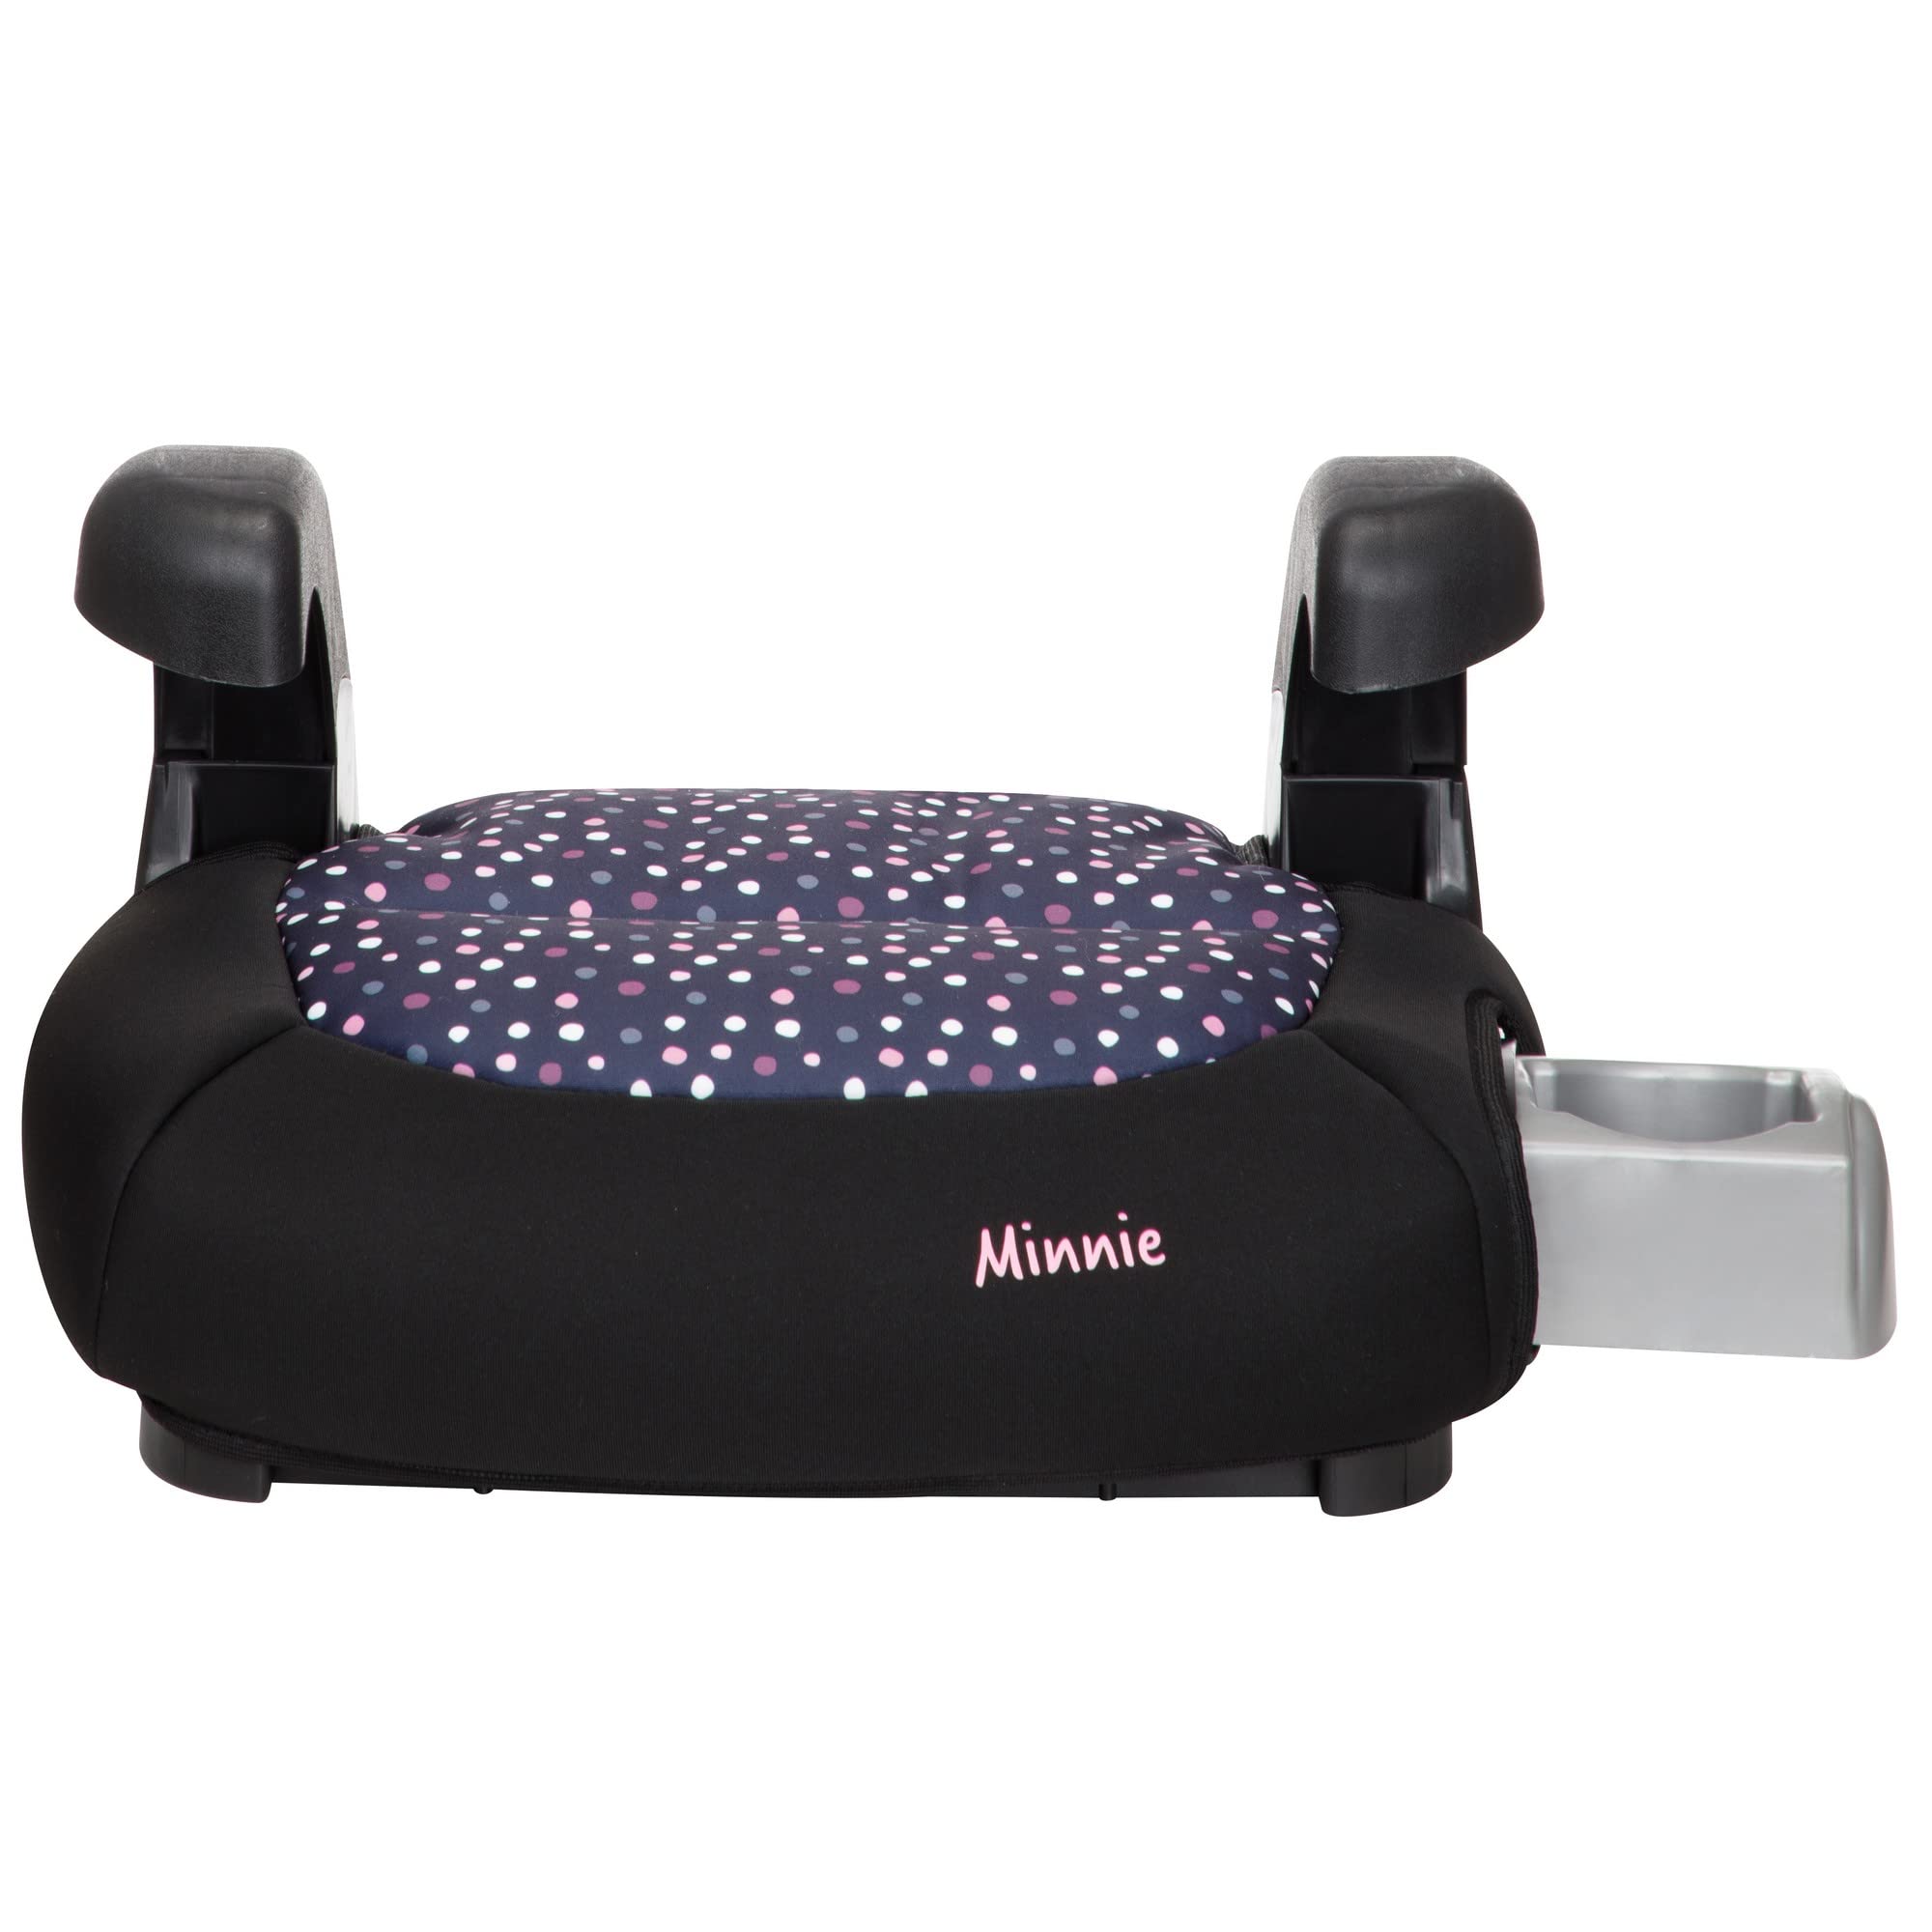 Disney Baby Pronto! Belt-Positioning Booster Car Seat, Belt-Positioning Booster: 40–100 pounds, Minnie Dot Party